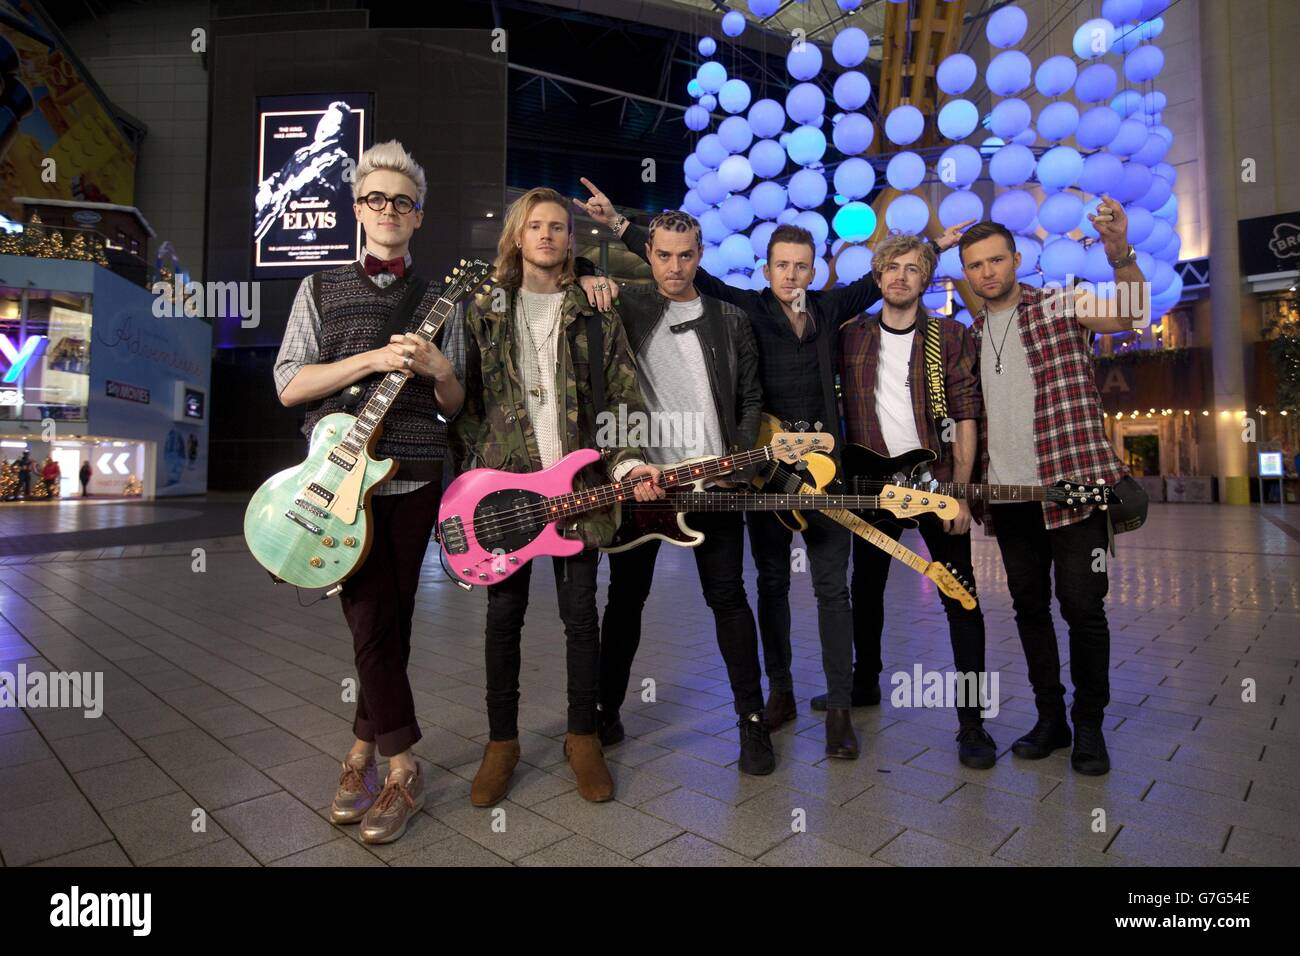 McBusted are (left to right) Tom Fletcher, Dougie Poynter, Matt Willis, Danny Jones, James Bourne and Harry Judd, who have returned to the iconic O2 in London to recreate their infamous air kick in celebration of their new DVD Tourplay and McBusted Live at the O2. Stock Photo